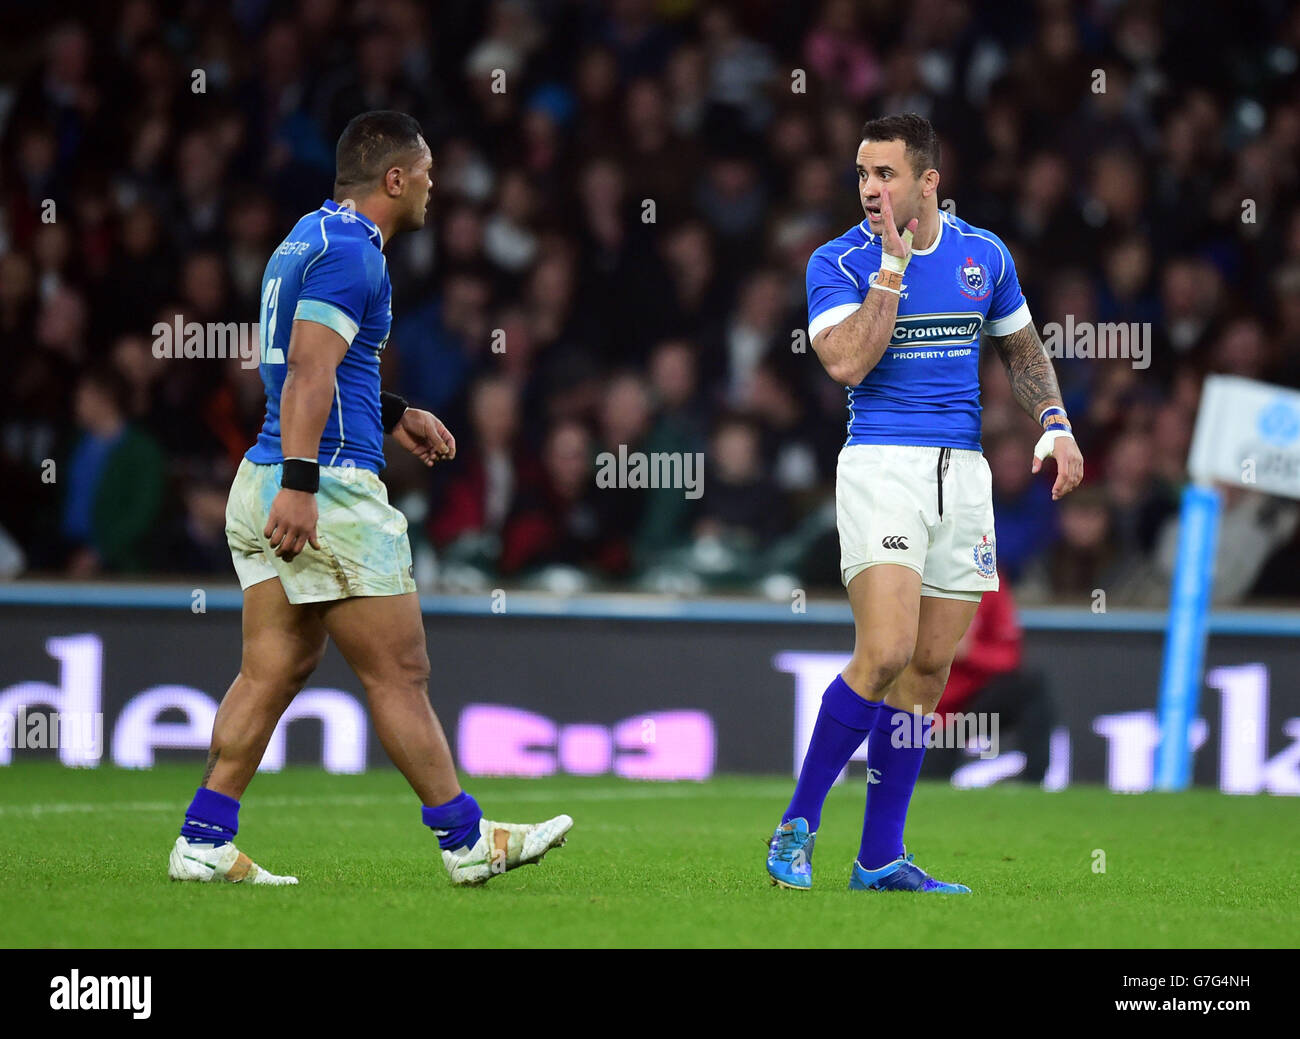 Samoa's Michael Stanley (right) during the QBE International match at Twickenham, London. PRESS ASSOCIATION Photo. Picture date: Saturday November 22, 2014. See PA Story RUGBYU England. Photo credit should read: Adam Davy/PA Wire. Stock Photo